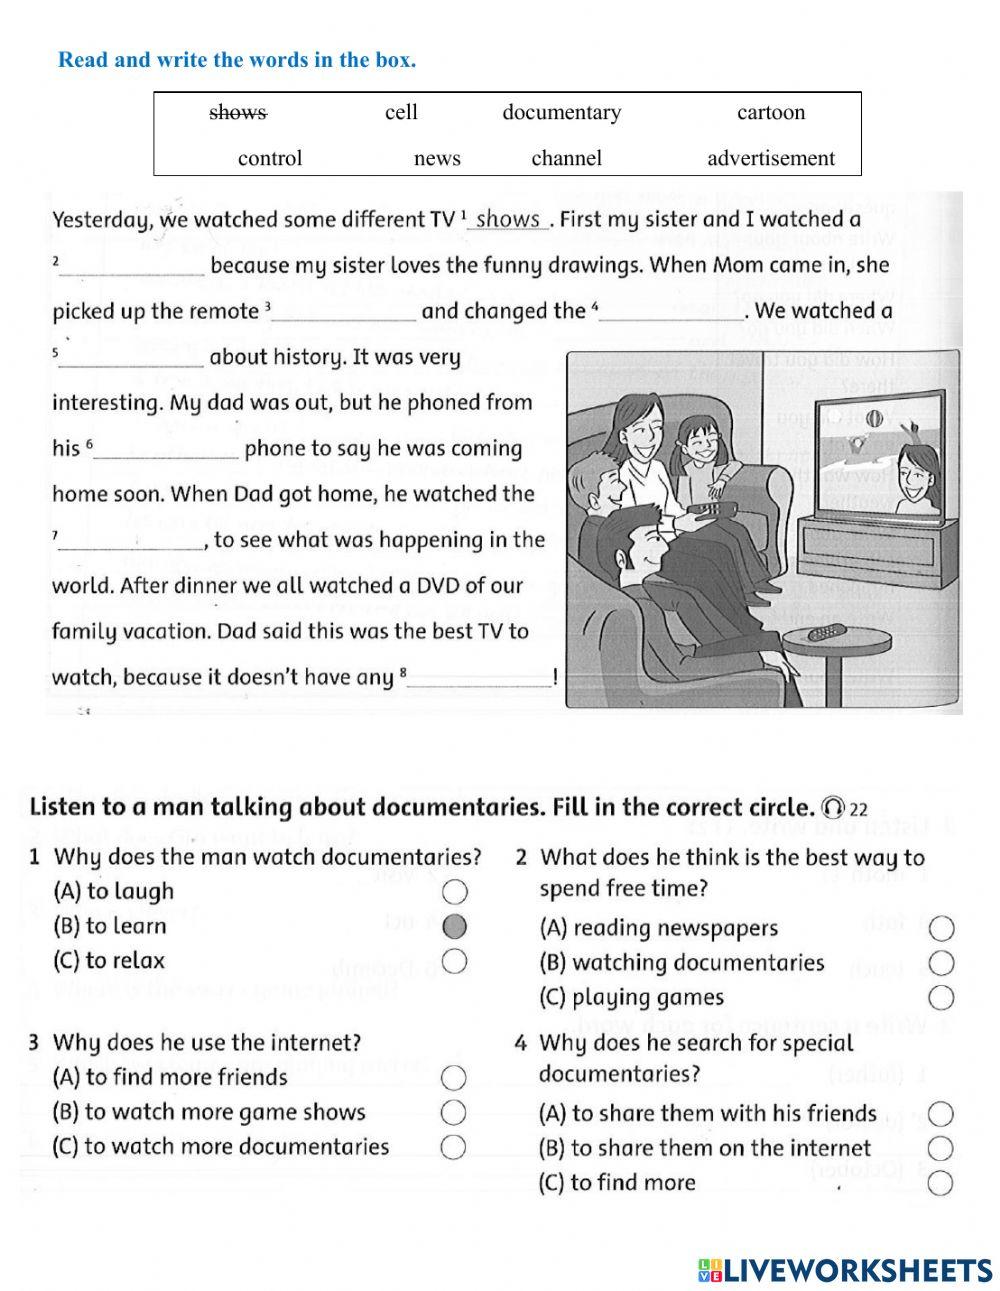 Grade 5 review for reading and listening